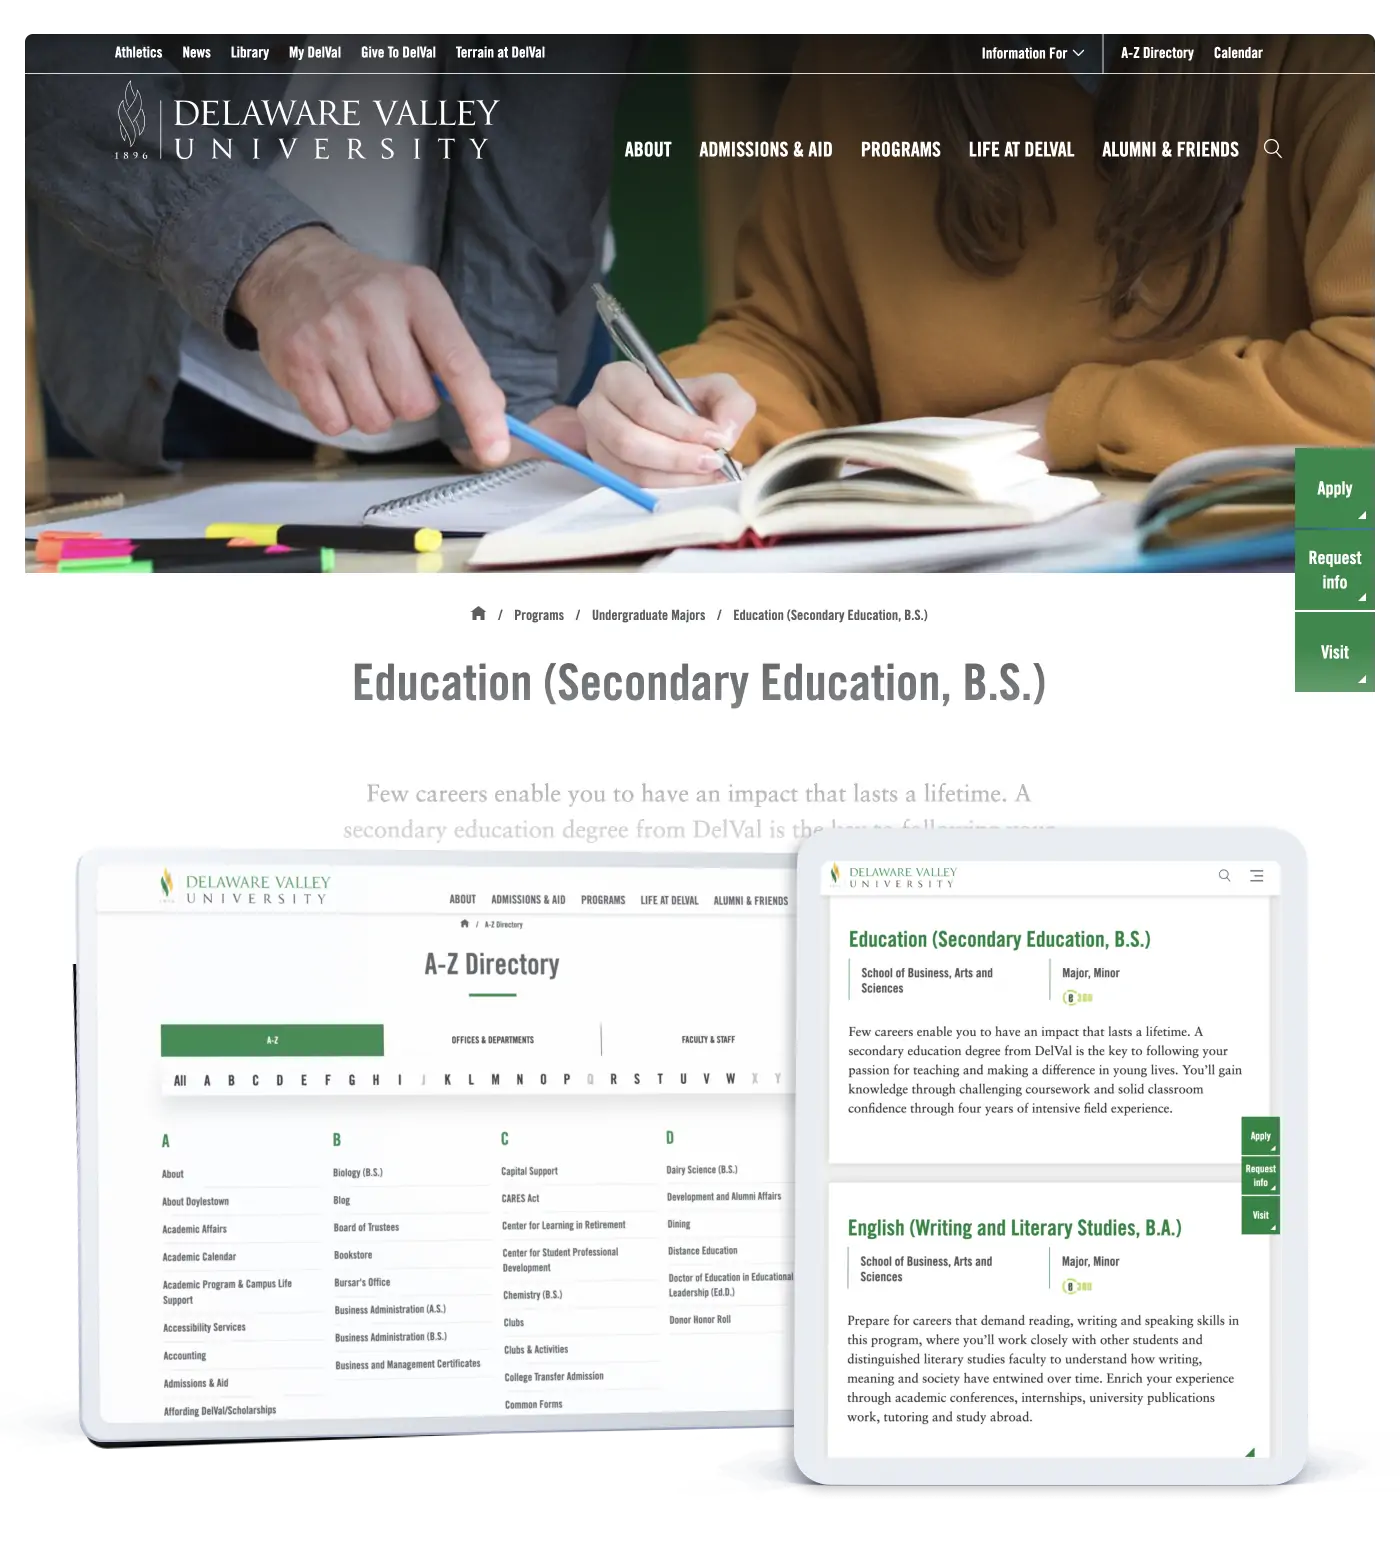 A collage featuring delval.edu's directory providing staff and office information, and previews of at-a-glance program information